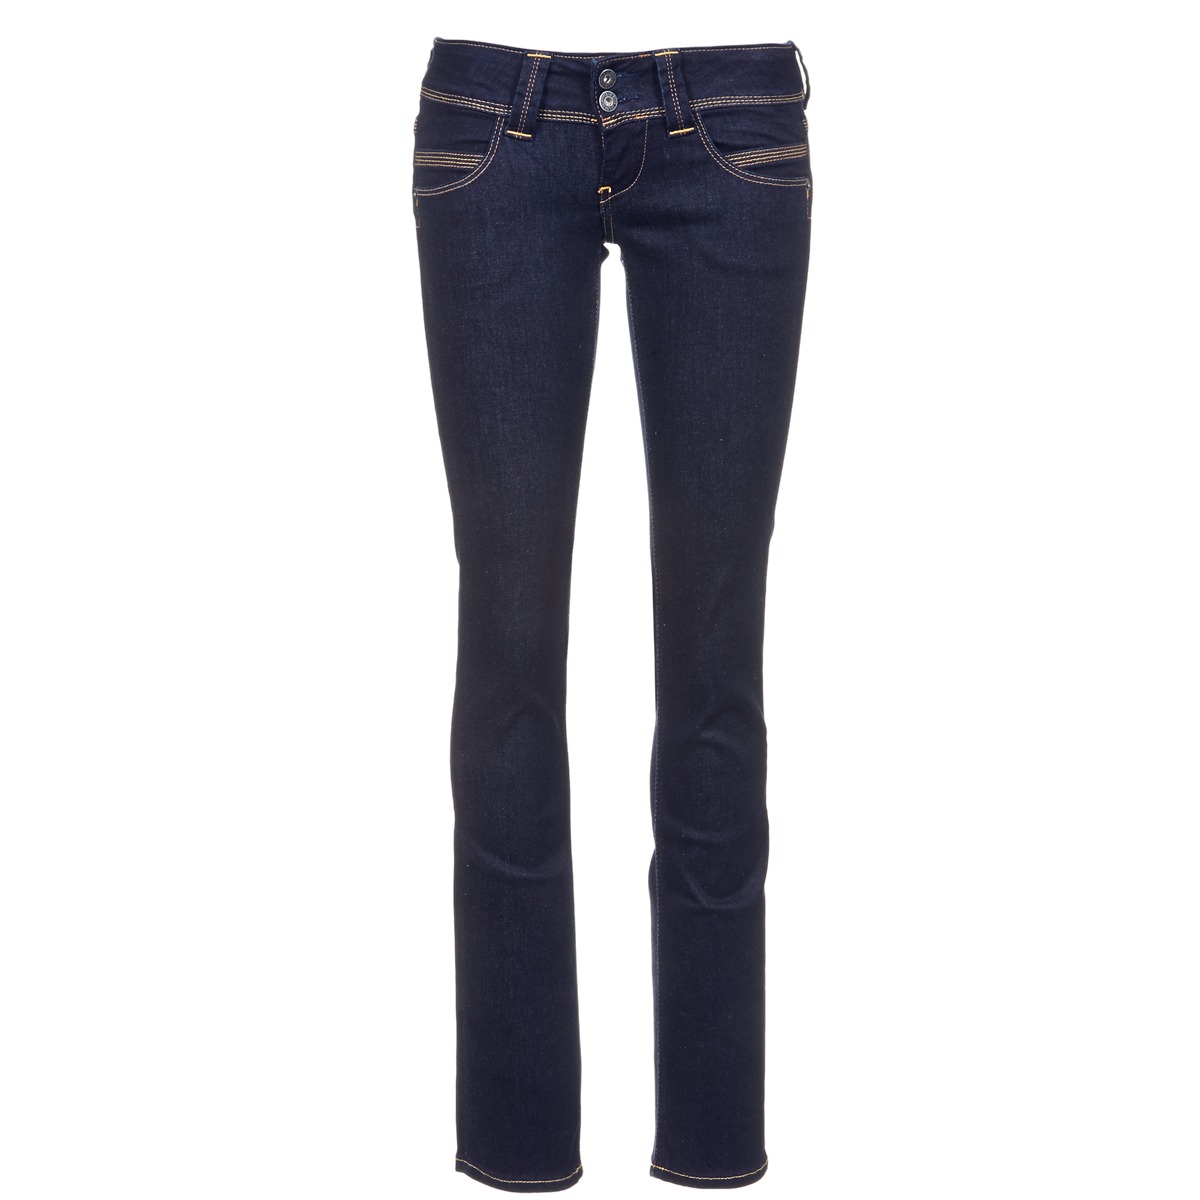 Pepe jeans VENUS Blue / M15 - Free delivery | Spartoo NET ! - Clothing straight  jeans Women